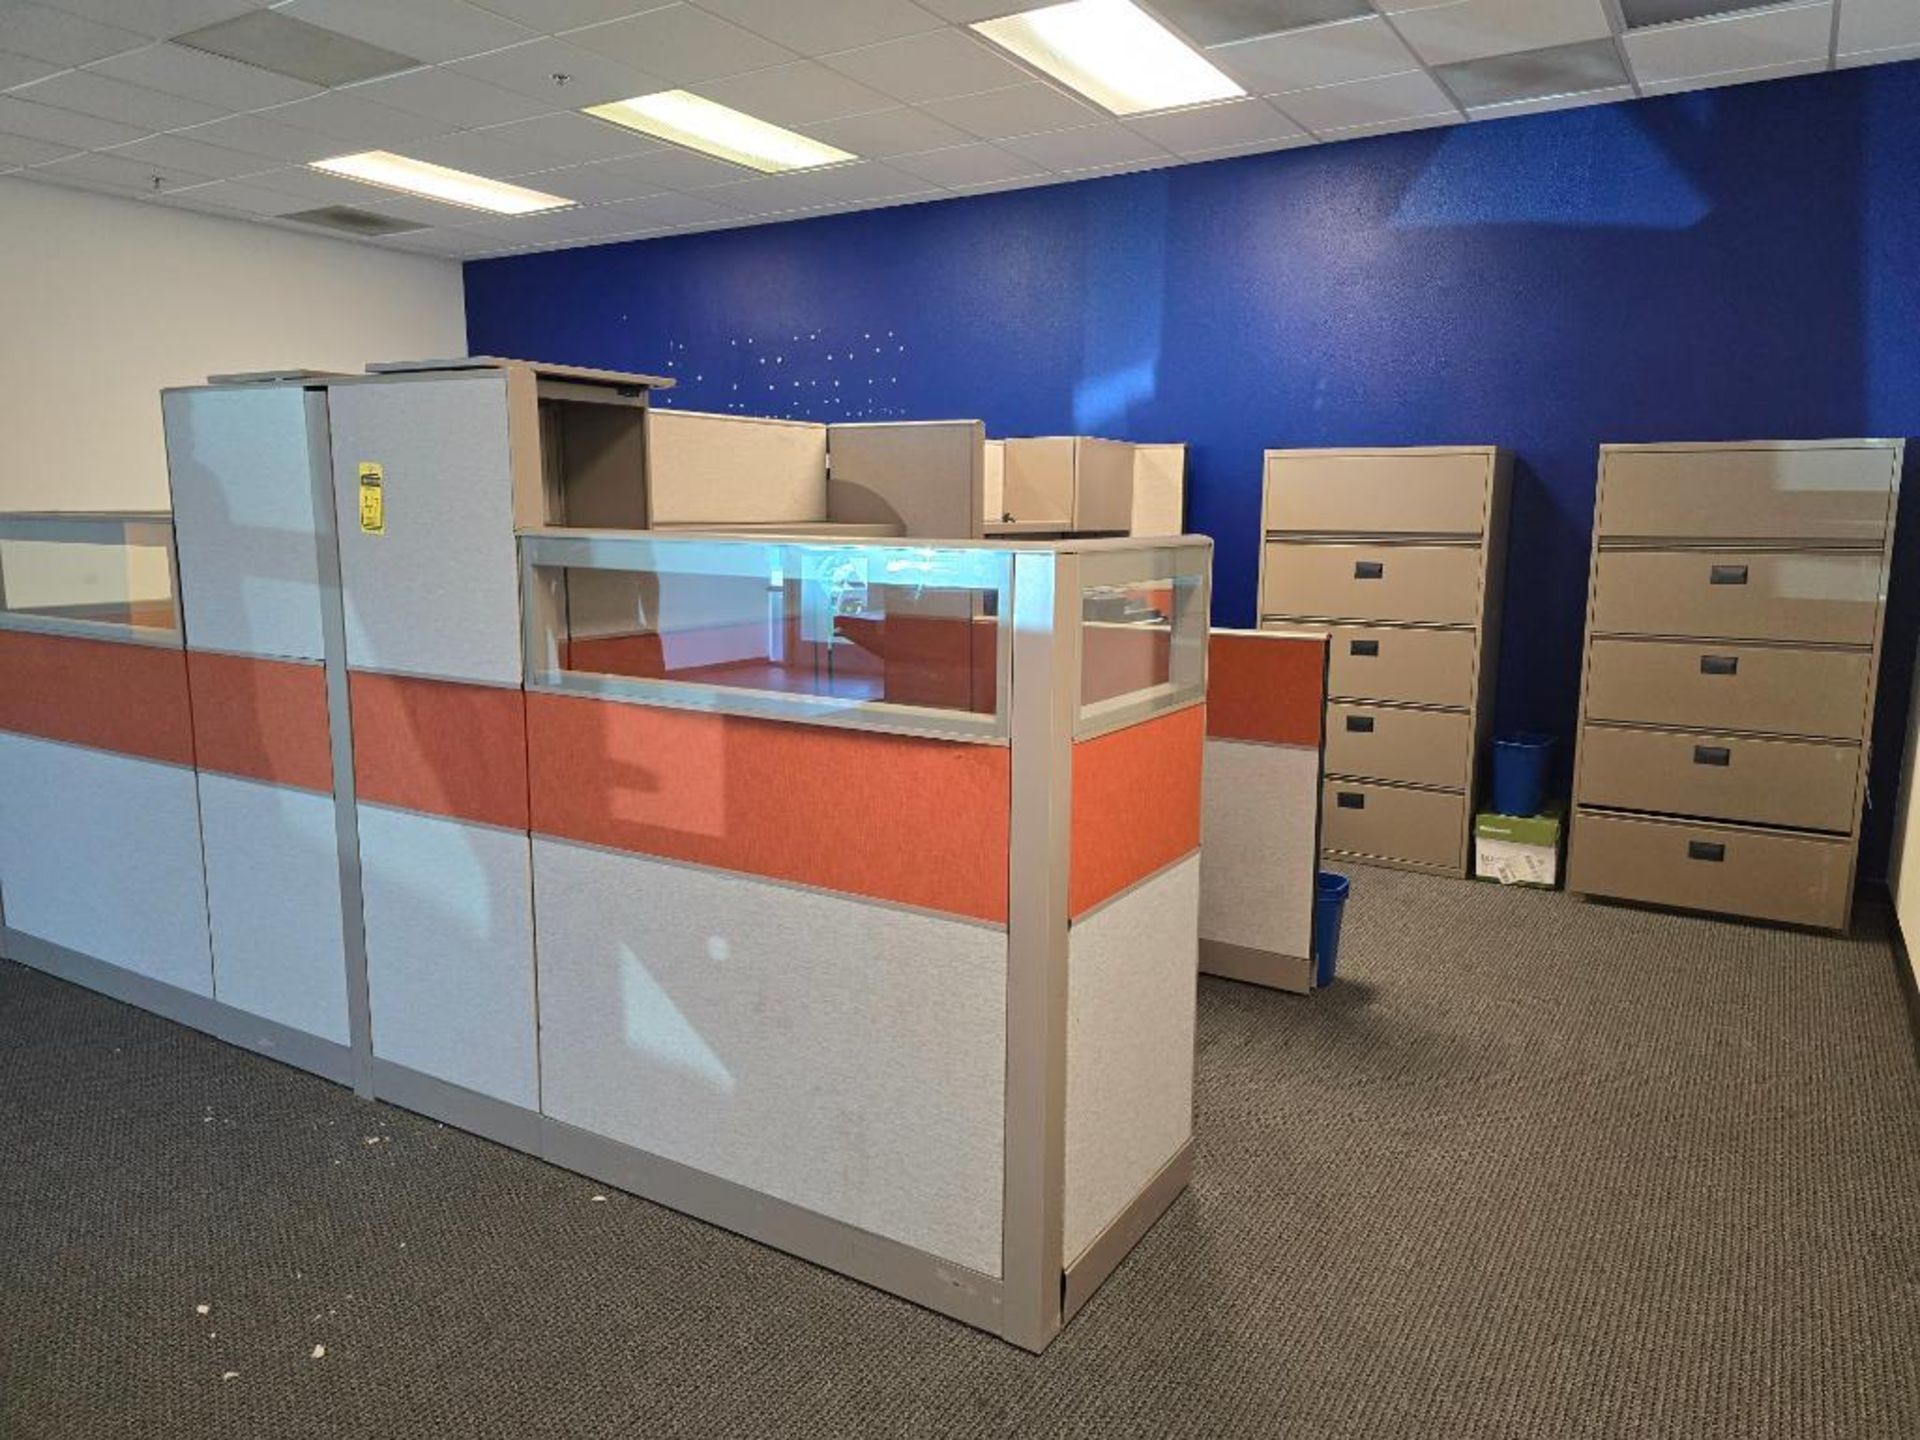 Office Area Furniture, Cabinets, Conference Table, Chairs, Metro Racks ($50 Loading Fee Will Be Adde